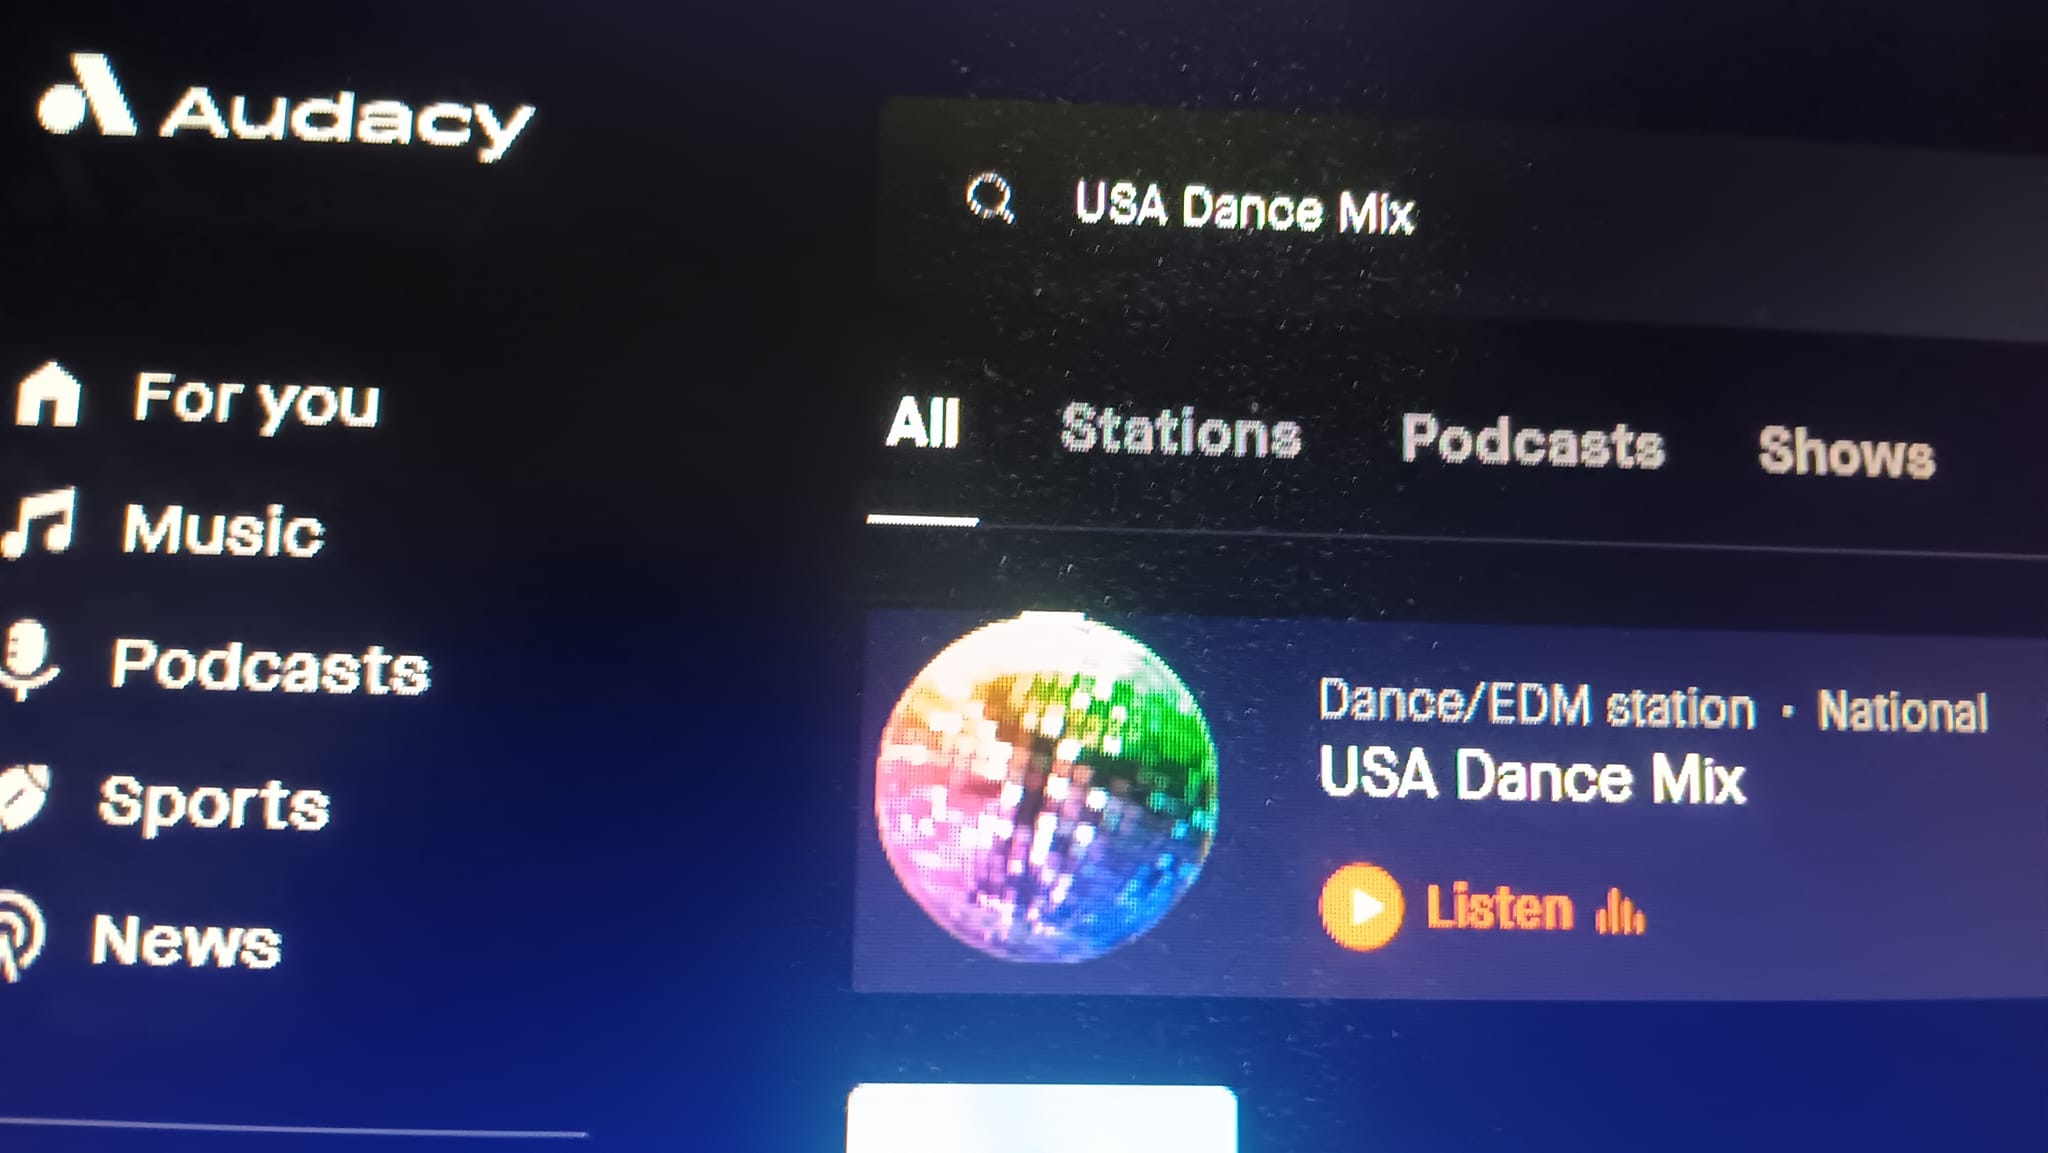 Audacy photo of USA Dance Mix streaming